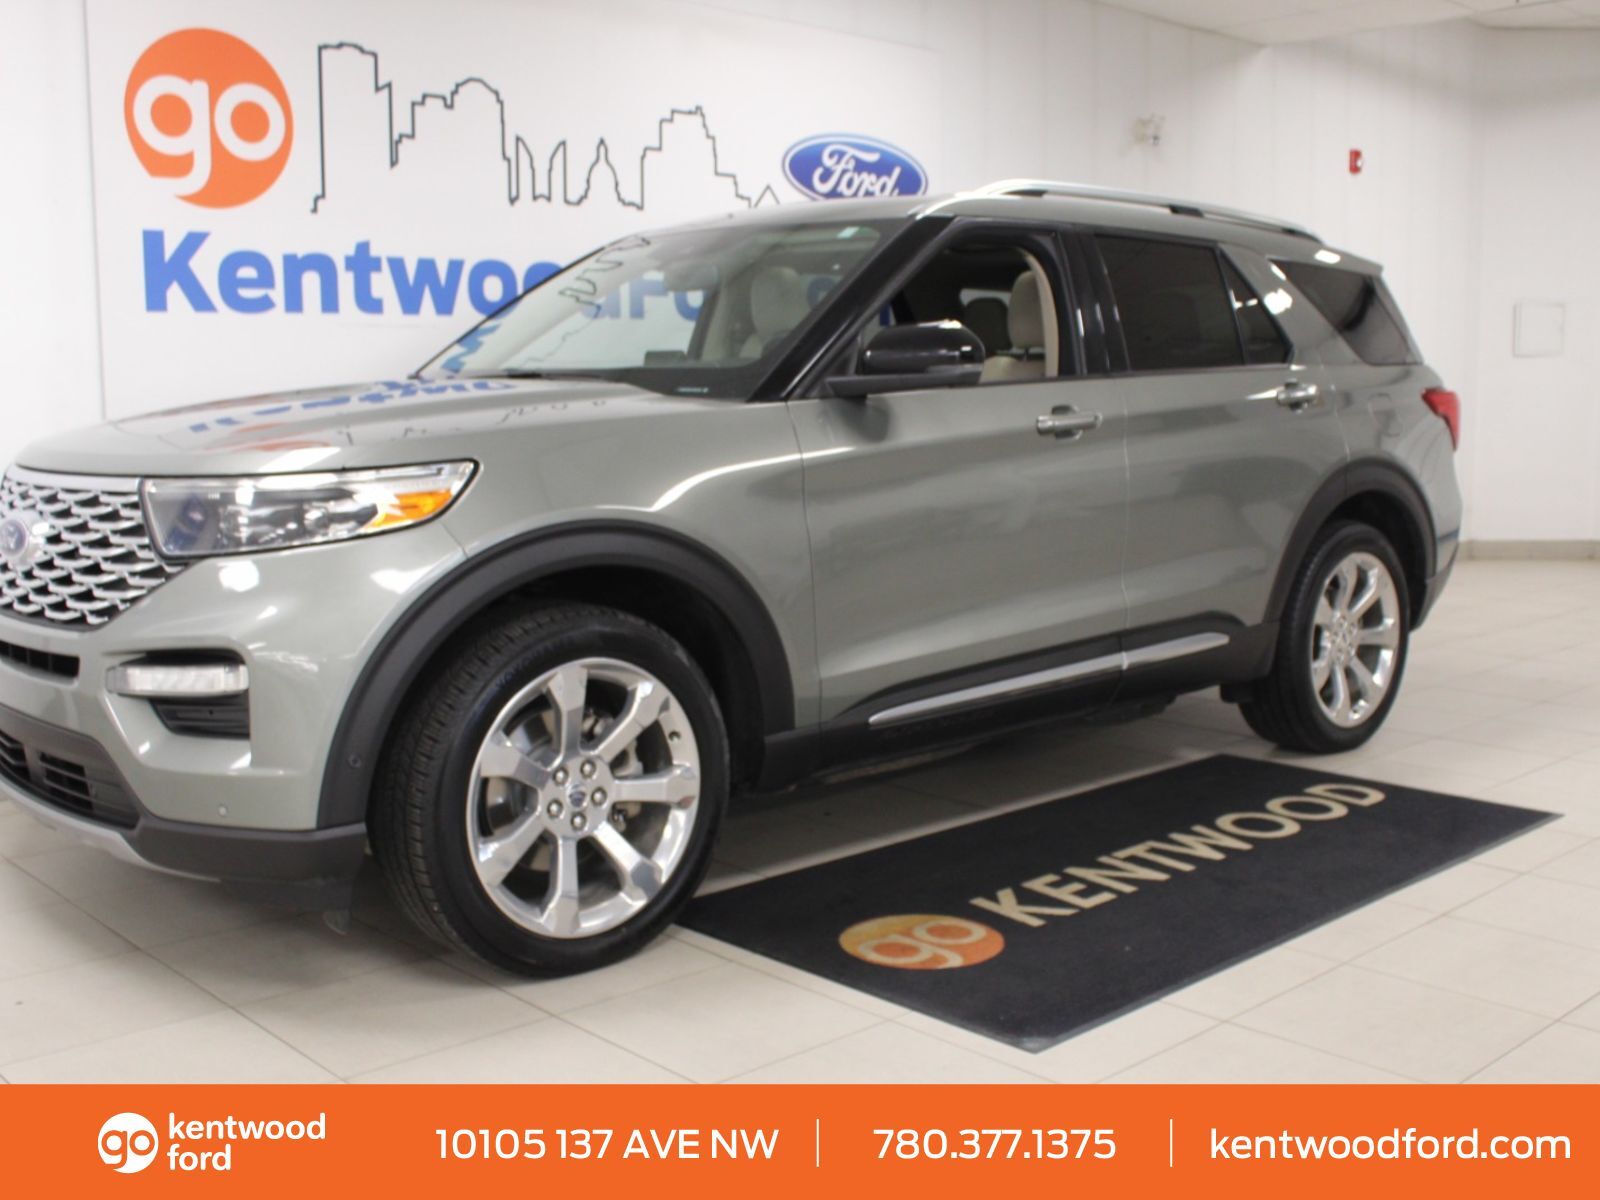 2020 Ford Explorer Platinum | 4WD | 21s | Heated Seats/Steering |